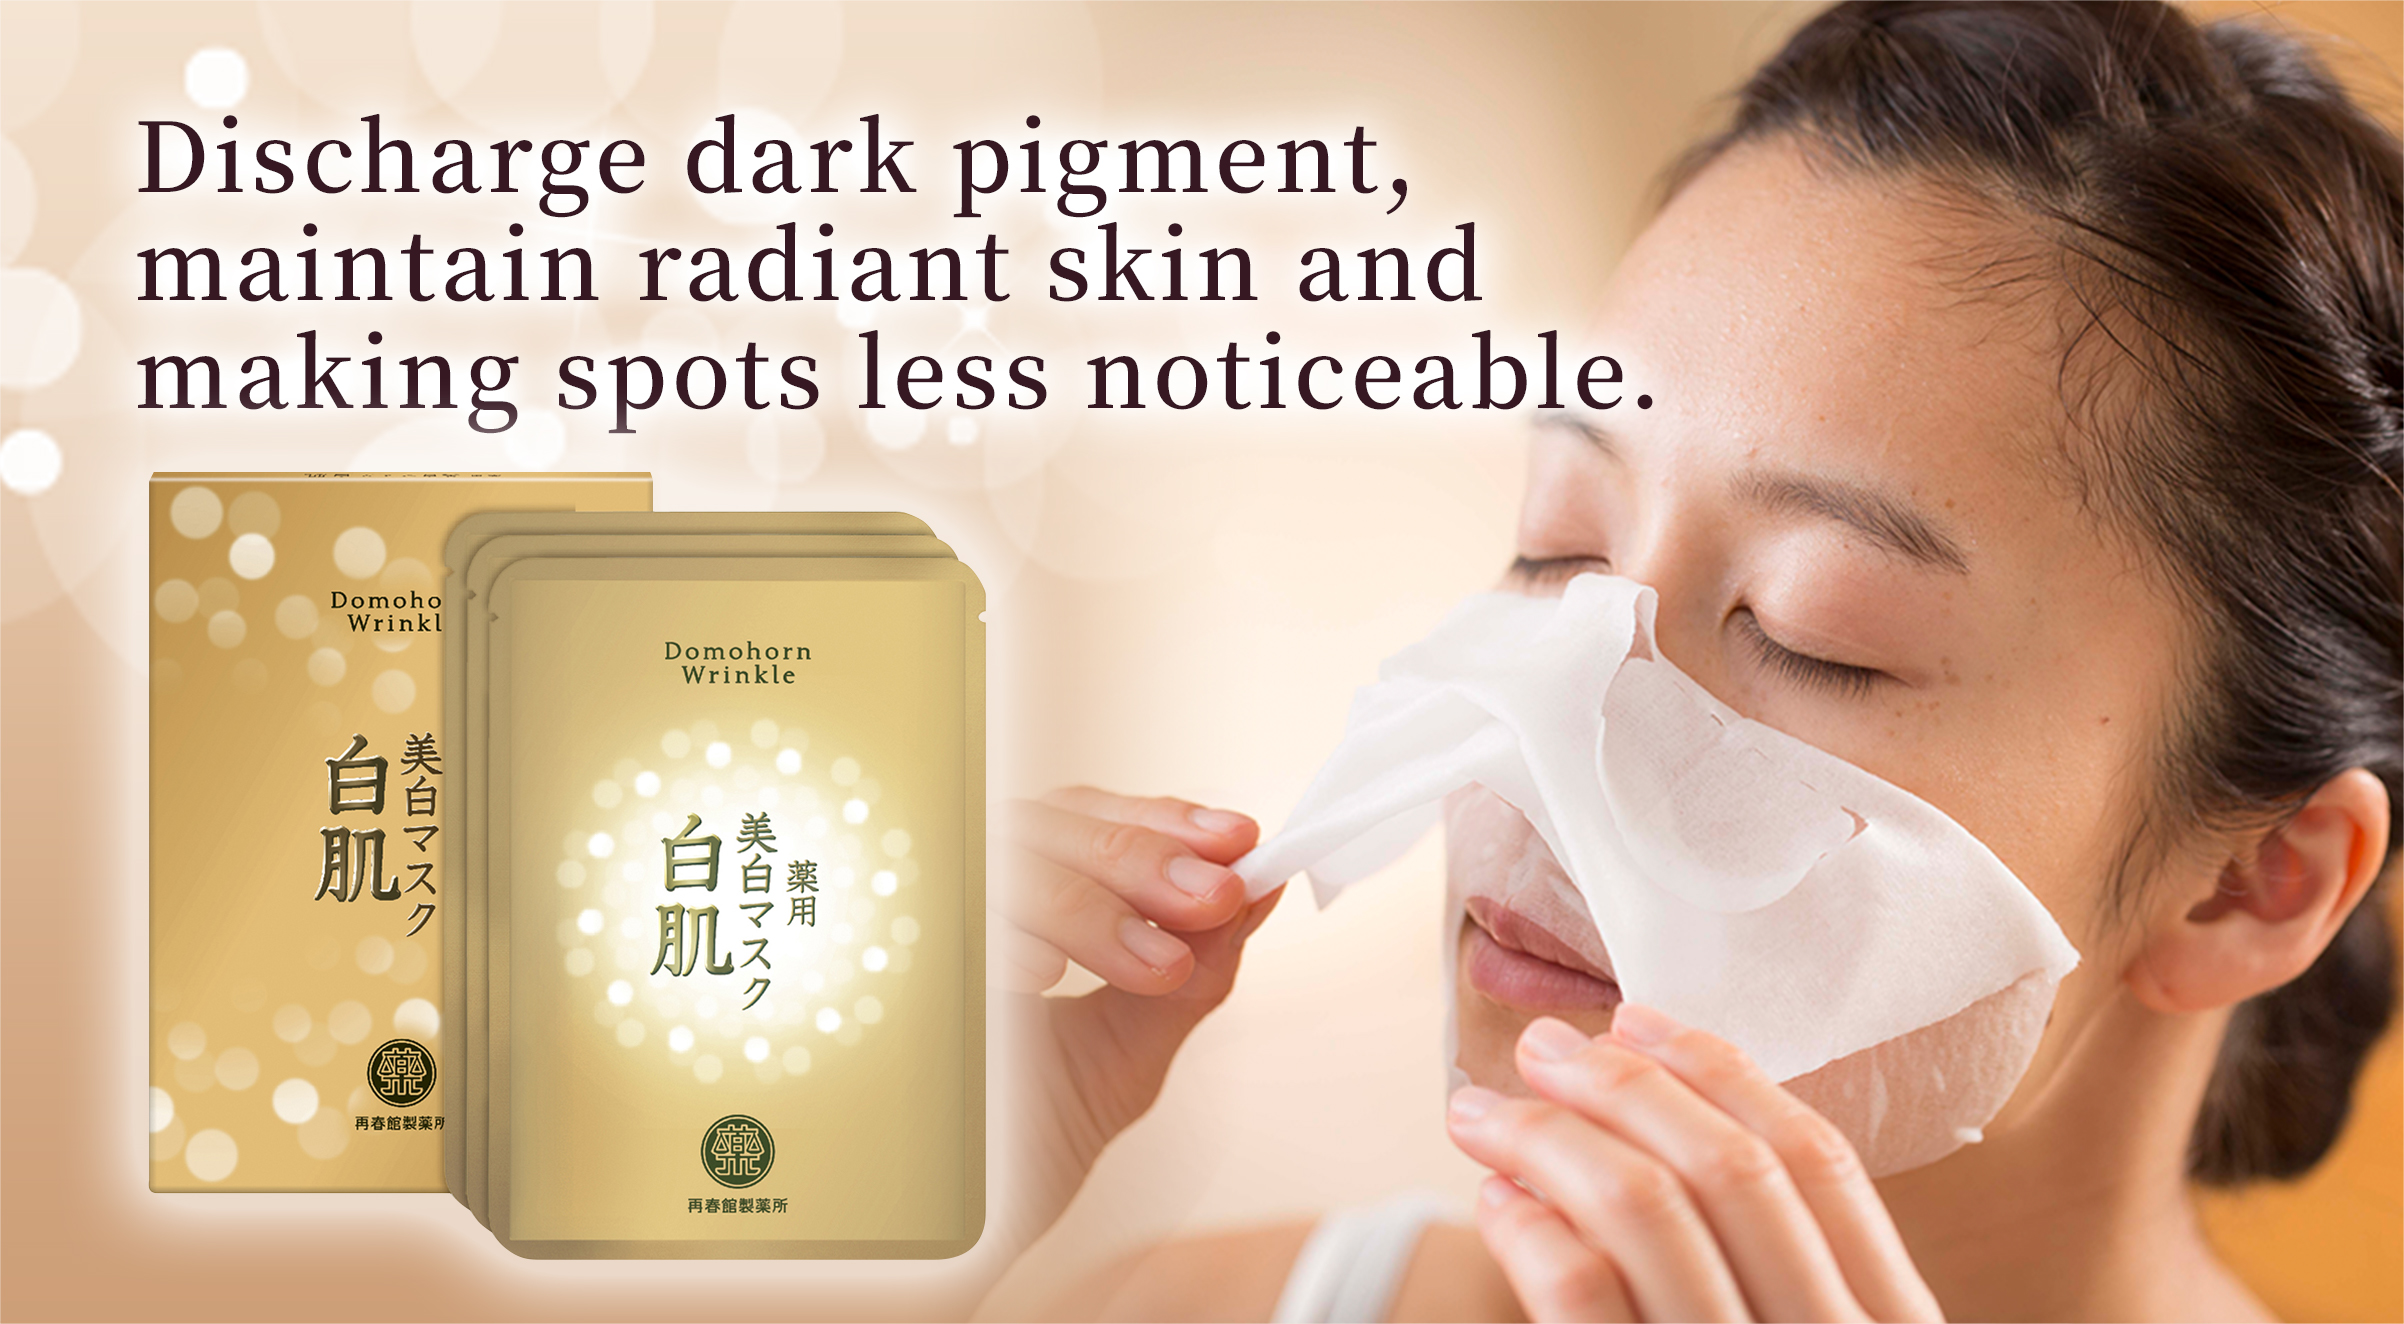 Discharge dark pigment, maintain radiant skin and making spots less noticeable.